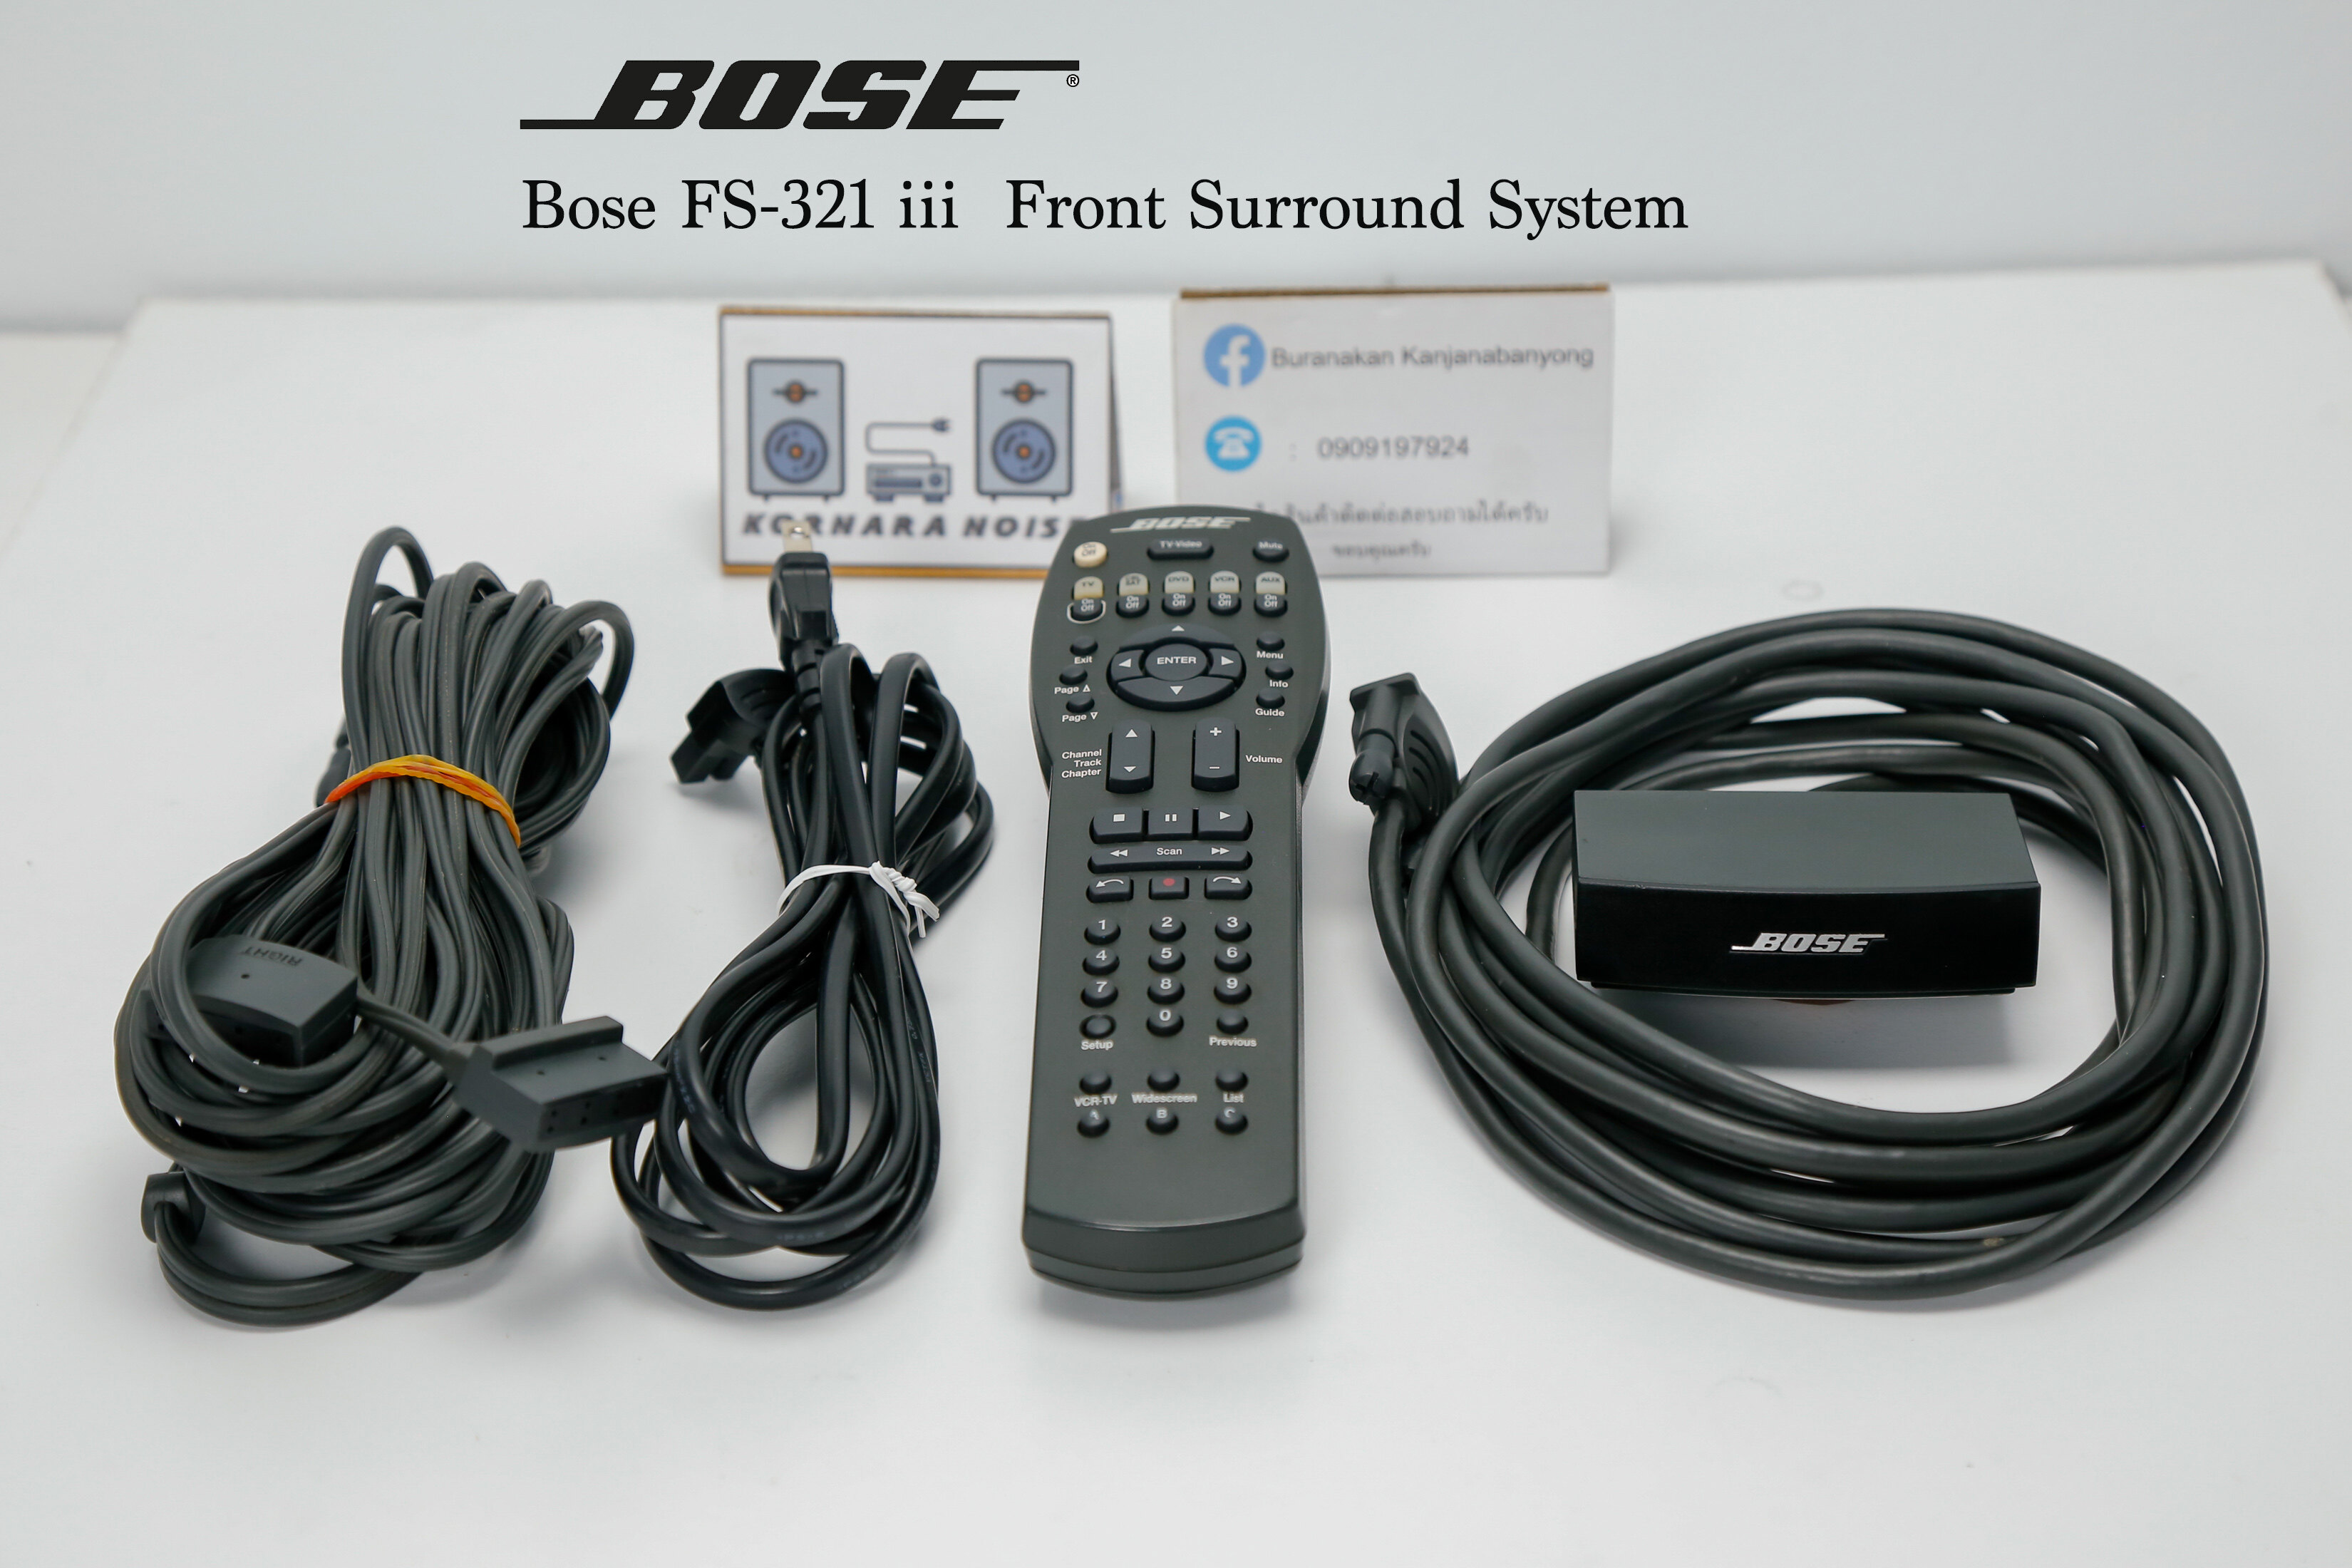 BOSE FS-321 front surround system - その他